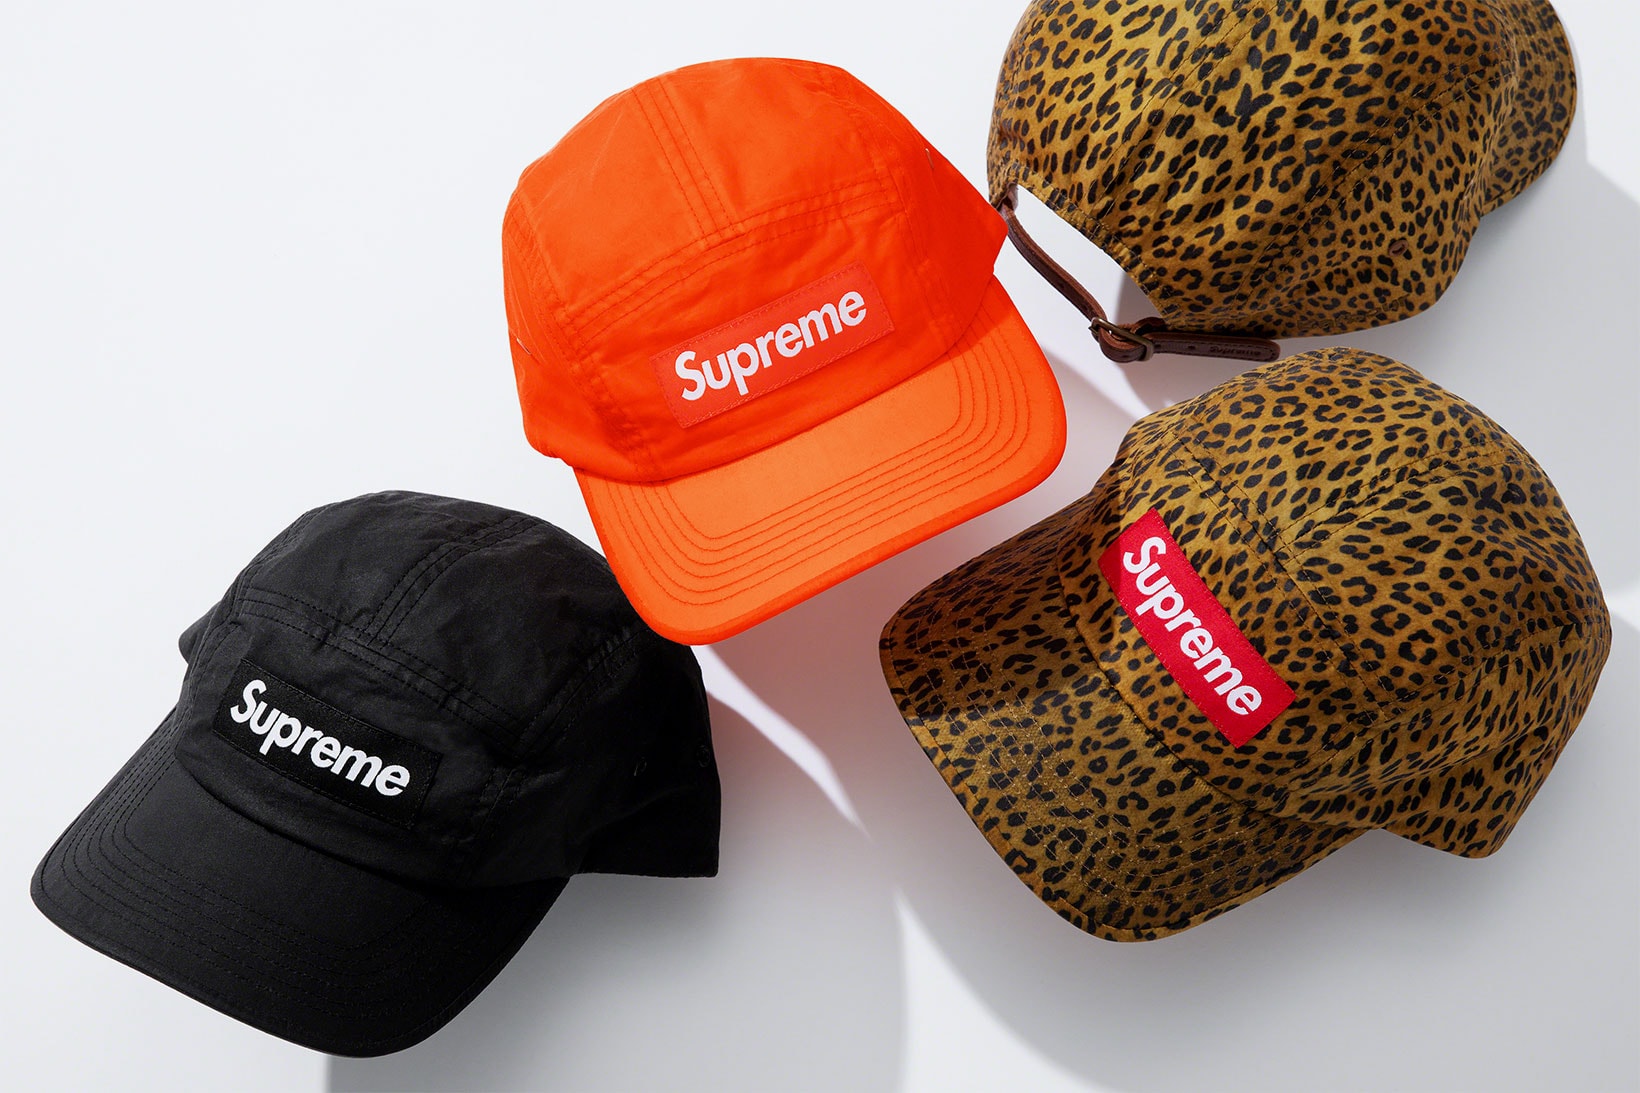 barbour supreme spring 2020 collaboration restock release info jackets hats bags 